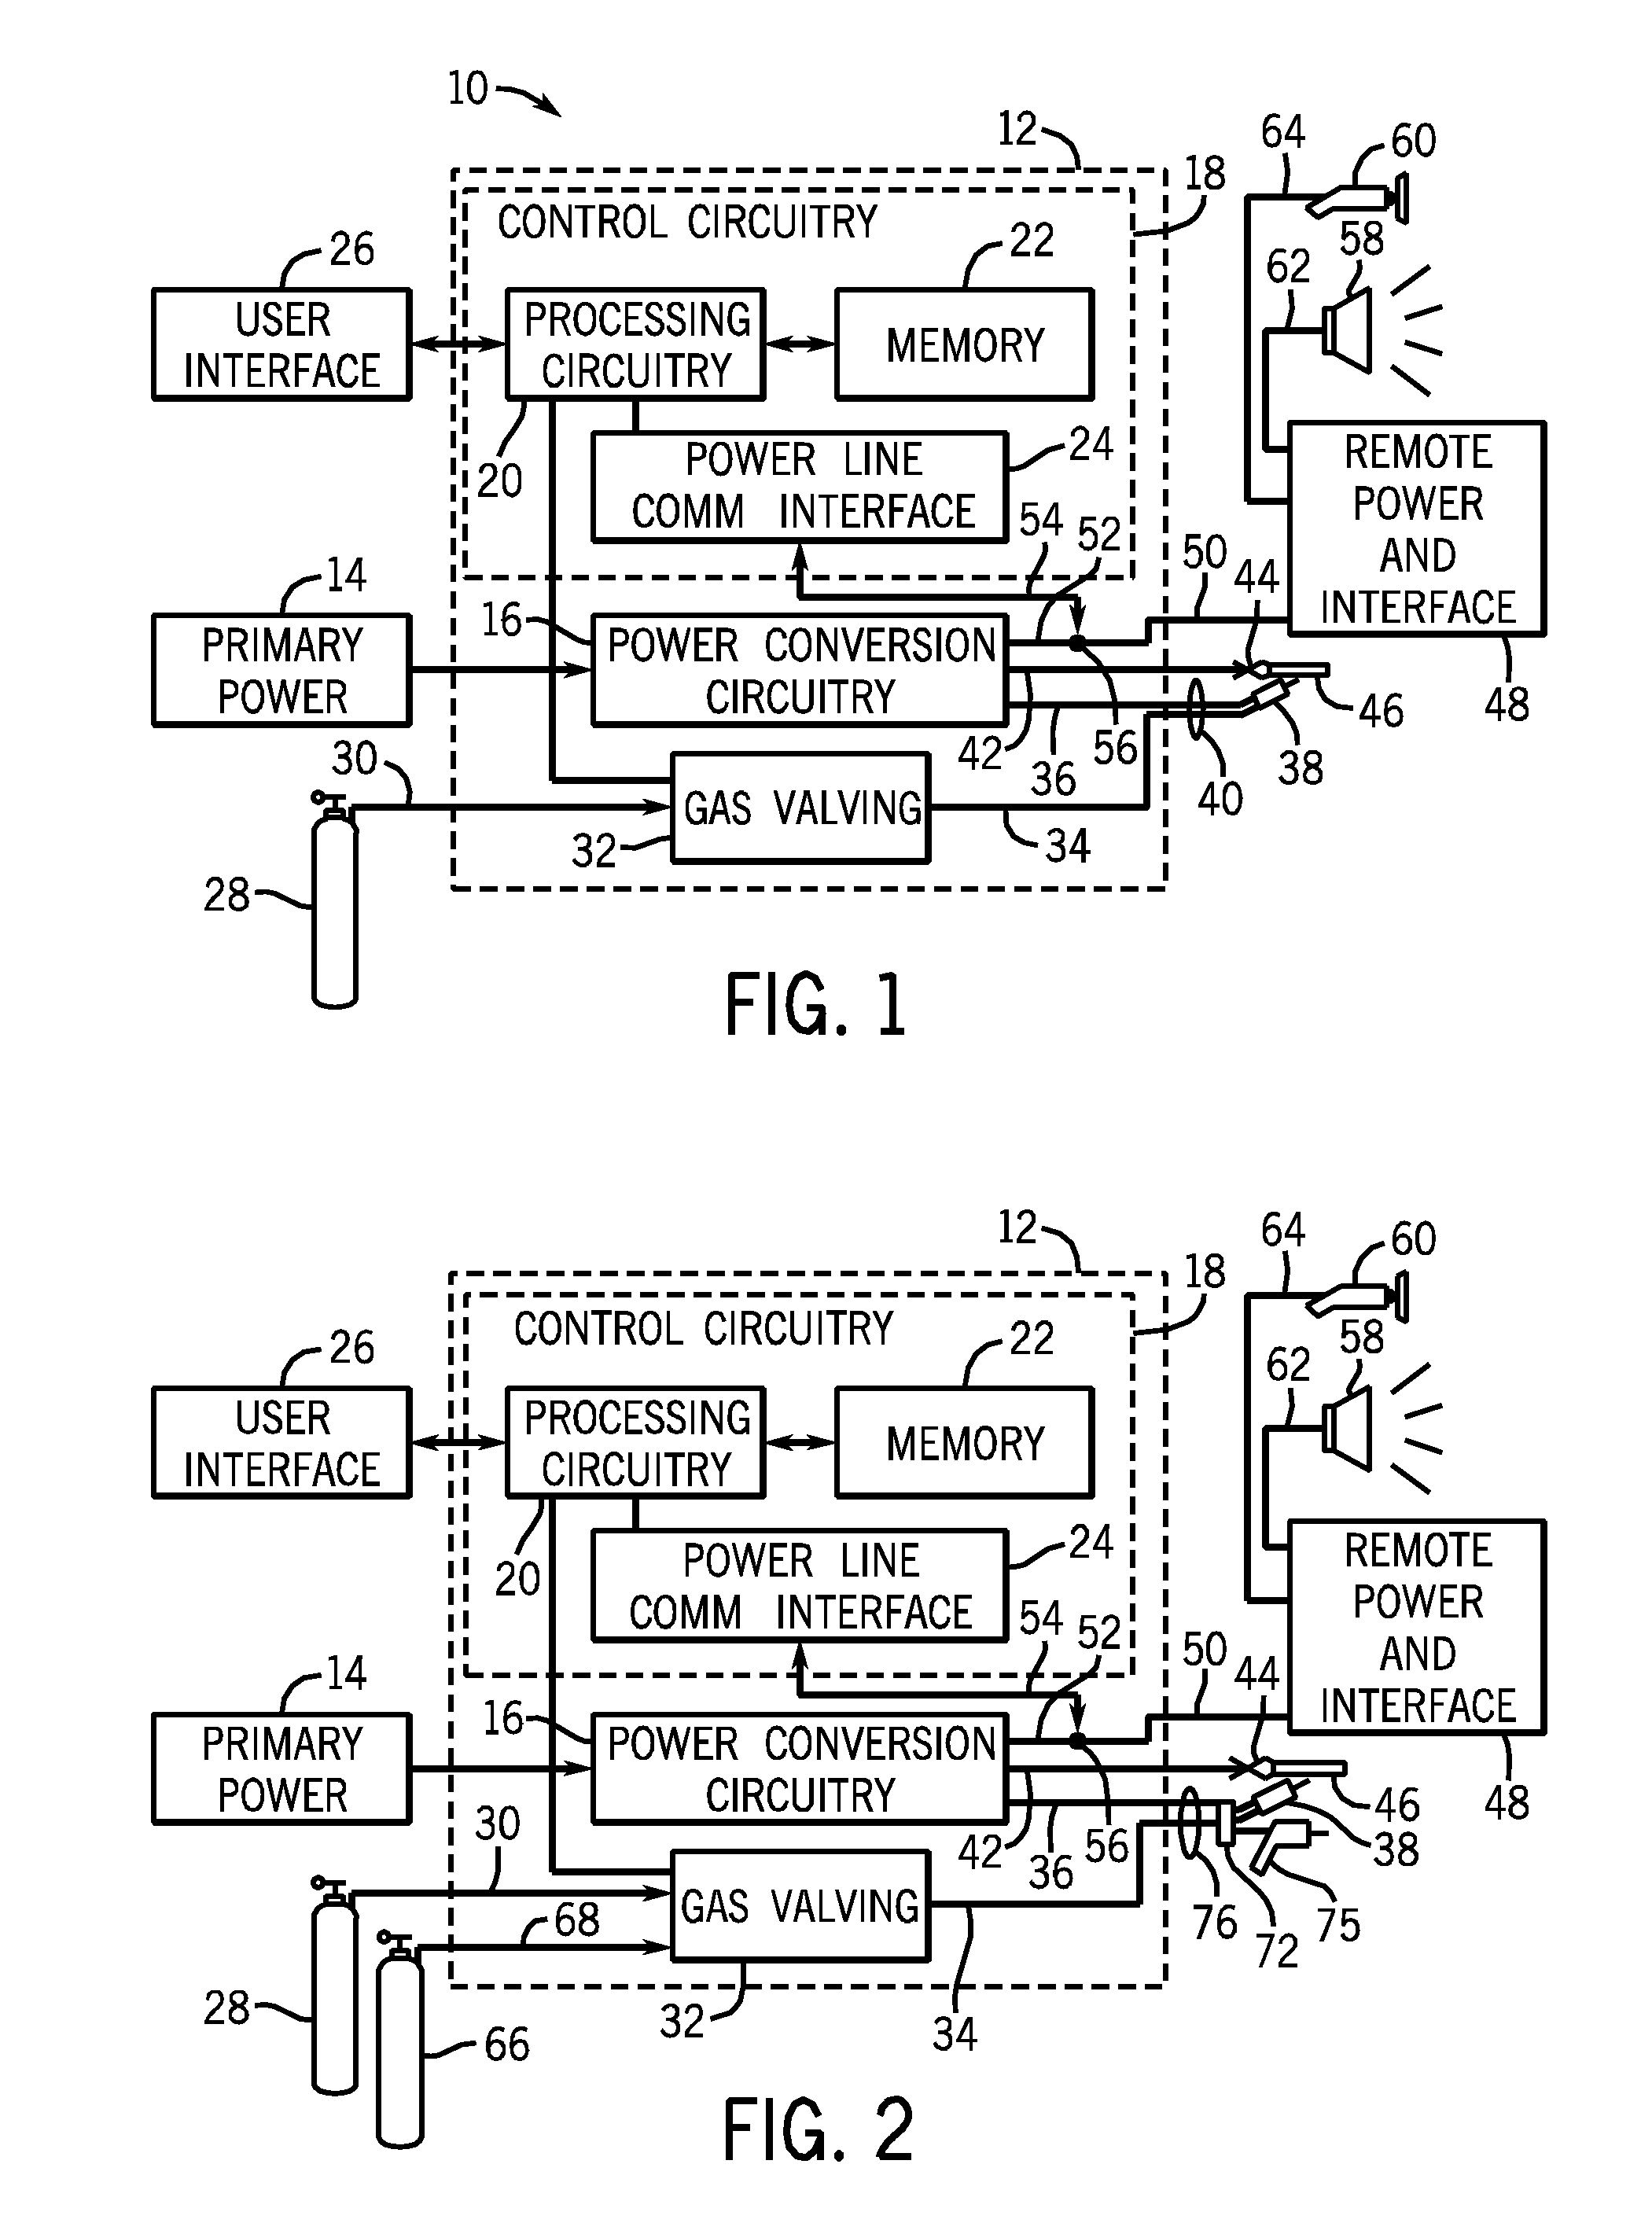 Welding system with power line communication